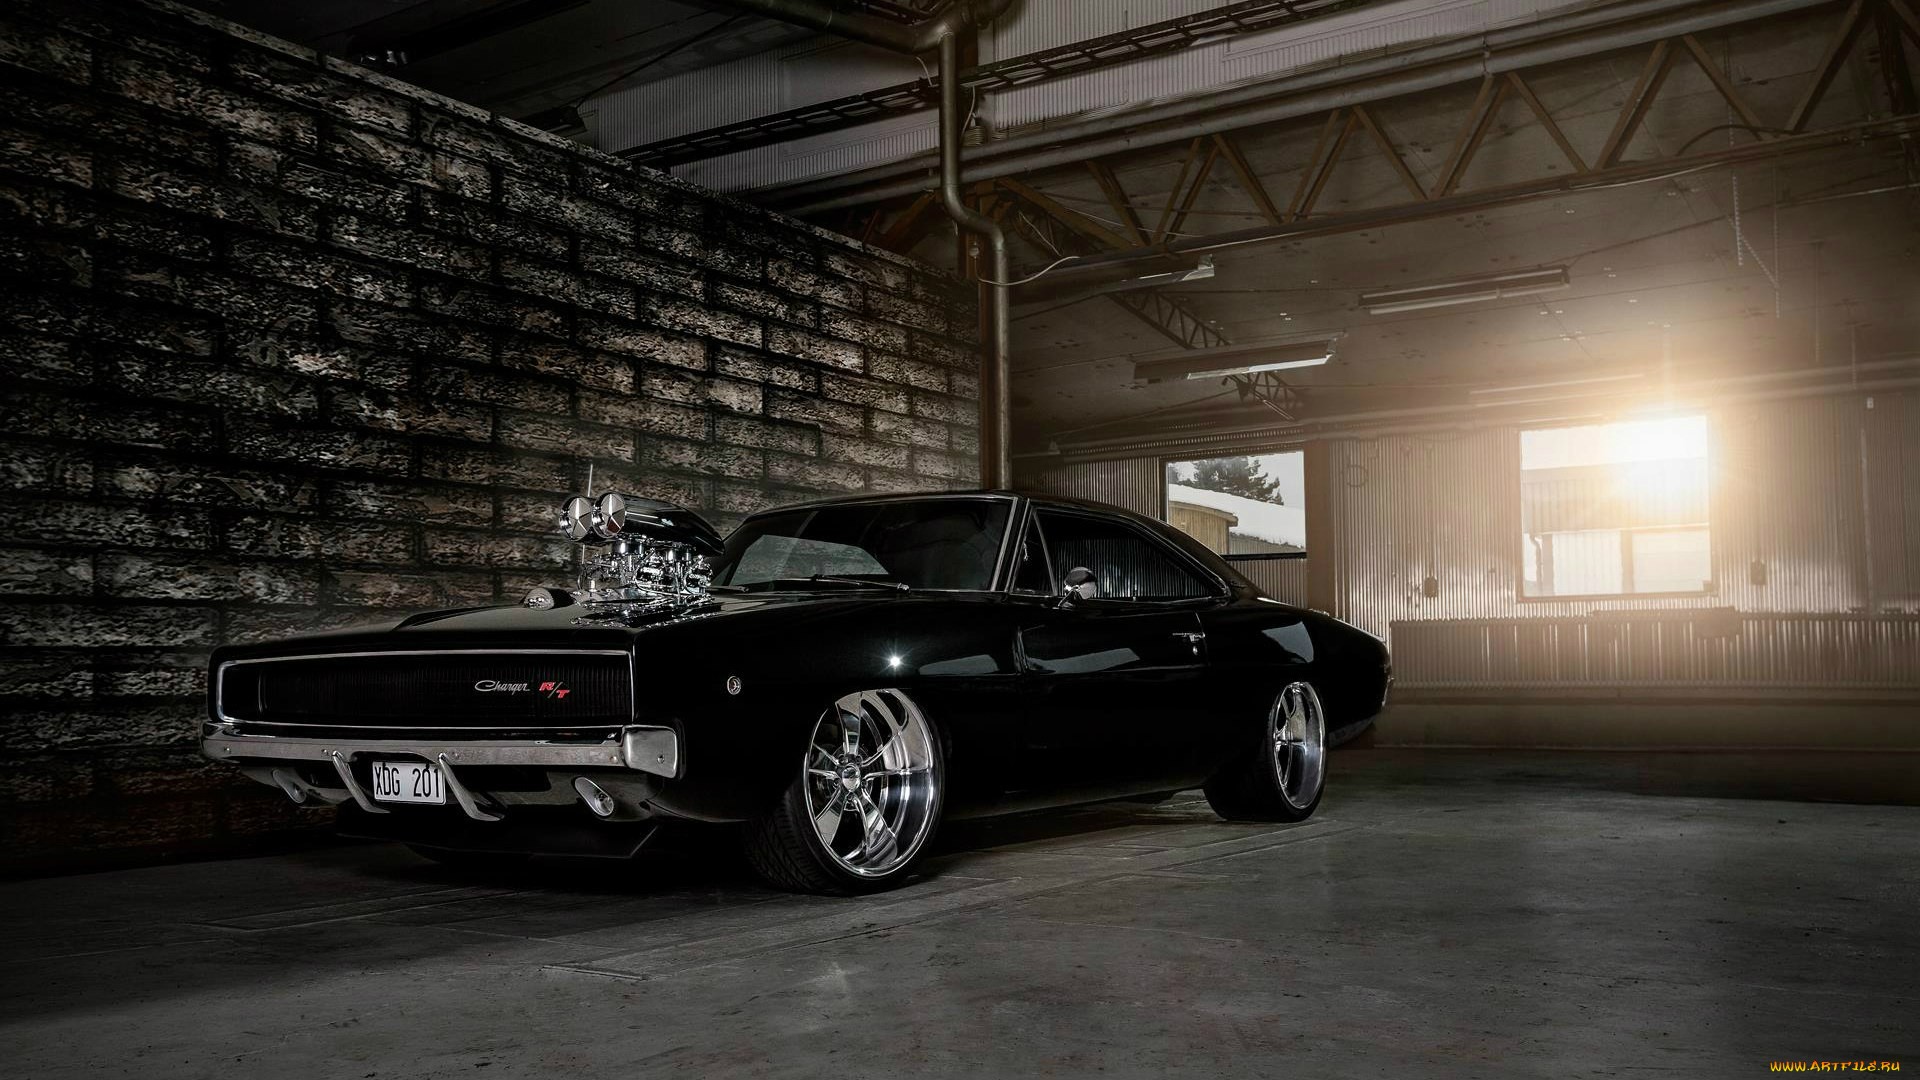 Dodge Charger 1968 muscle cars hot rod engine wallpaper